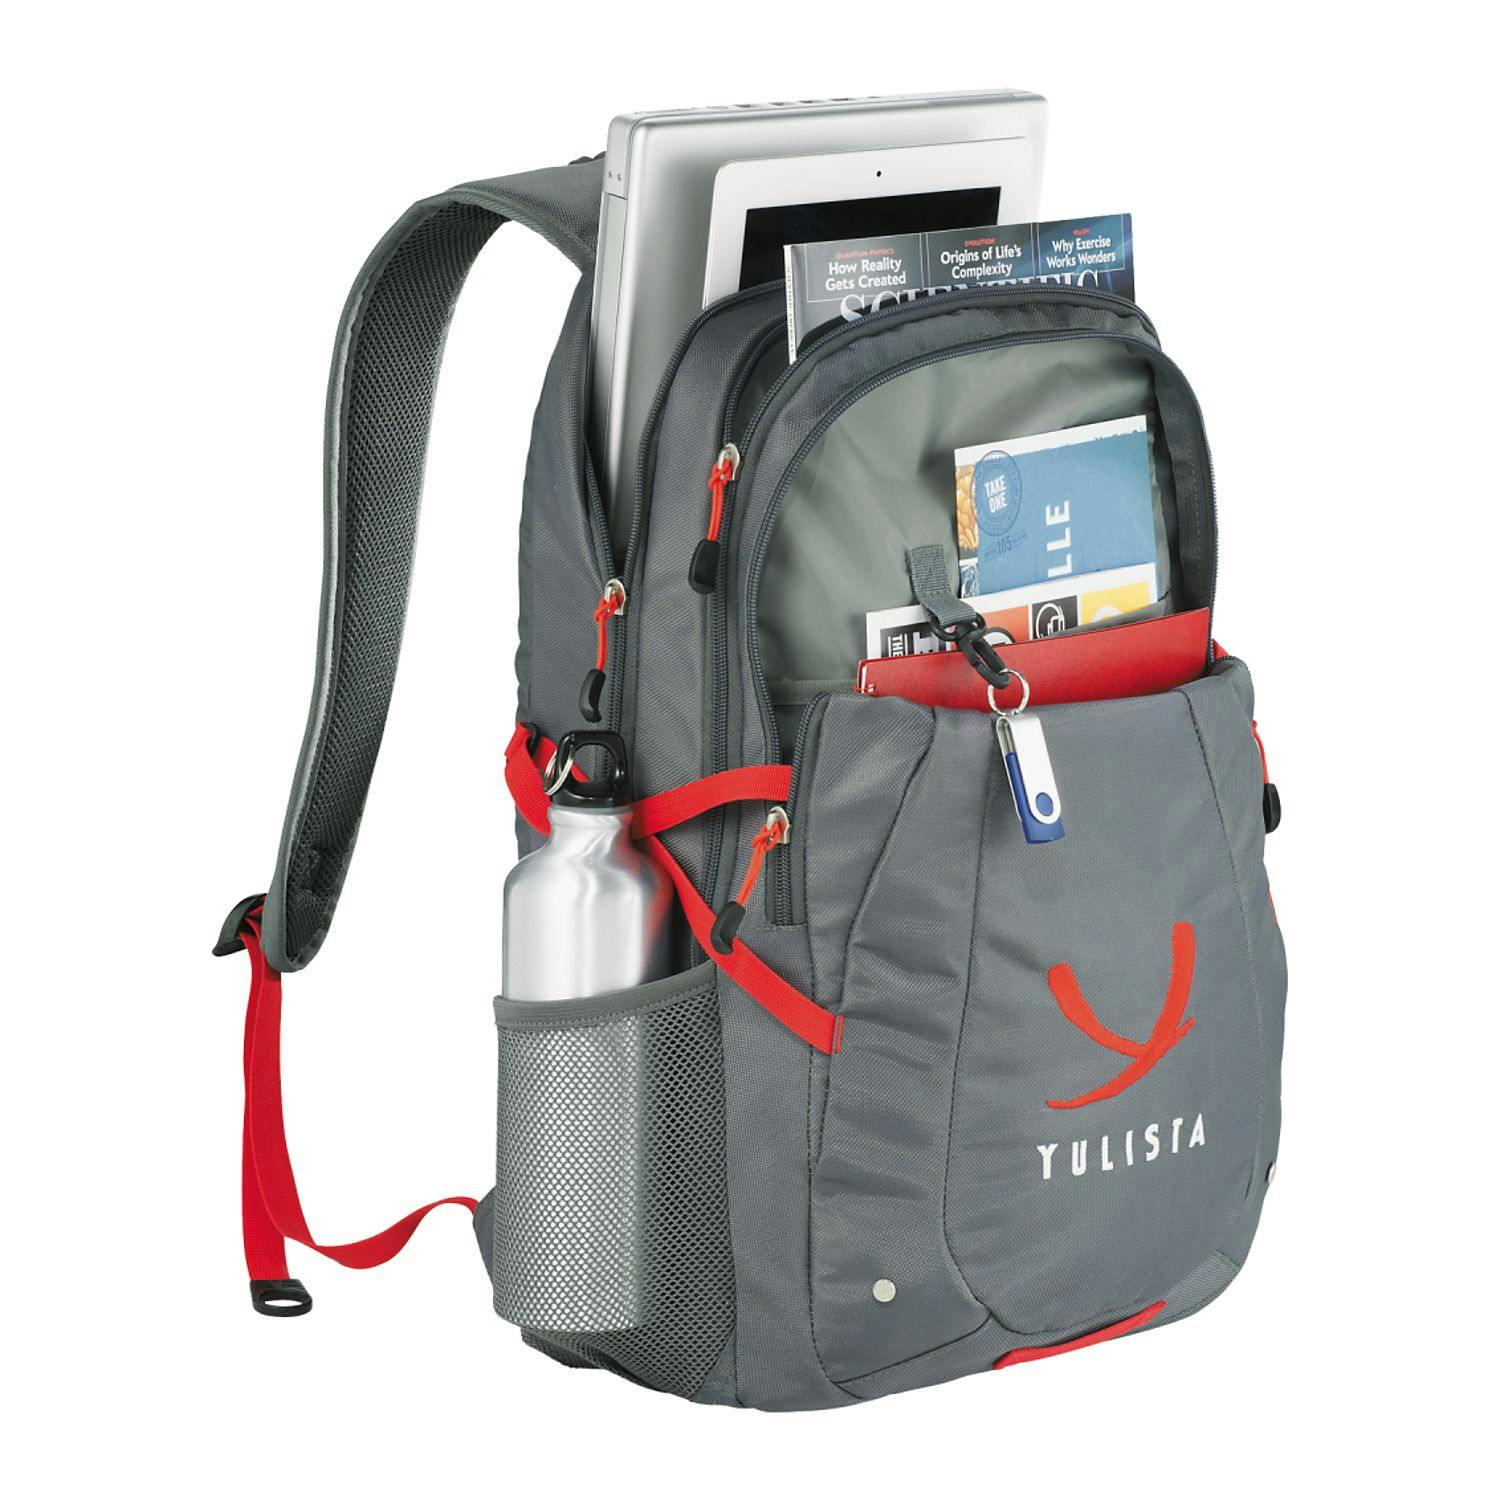 High Sierra Fallout 17" Computer Backpack - additional Image 3